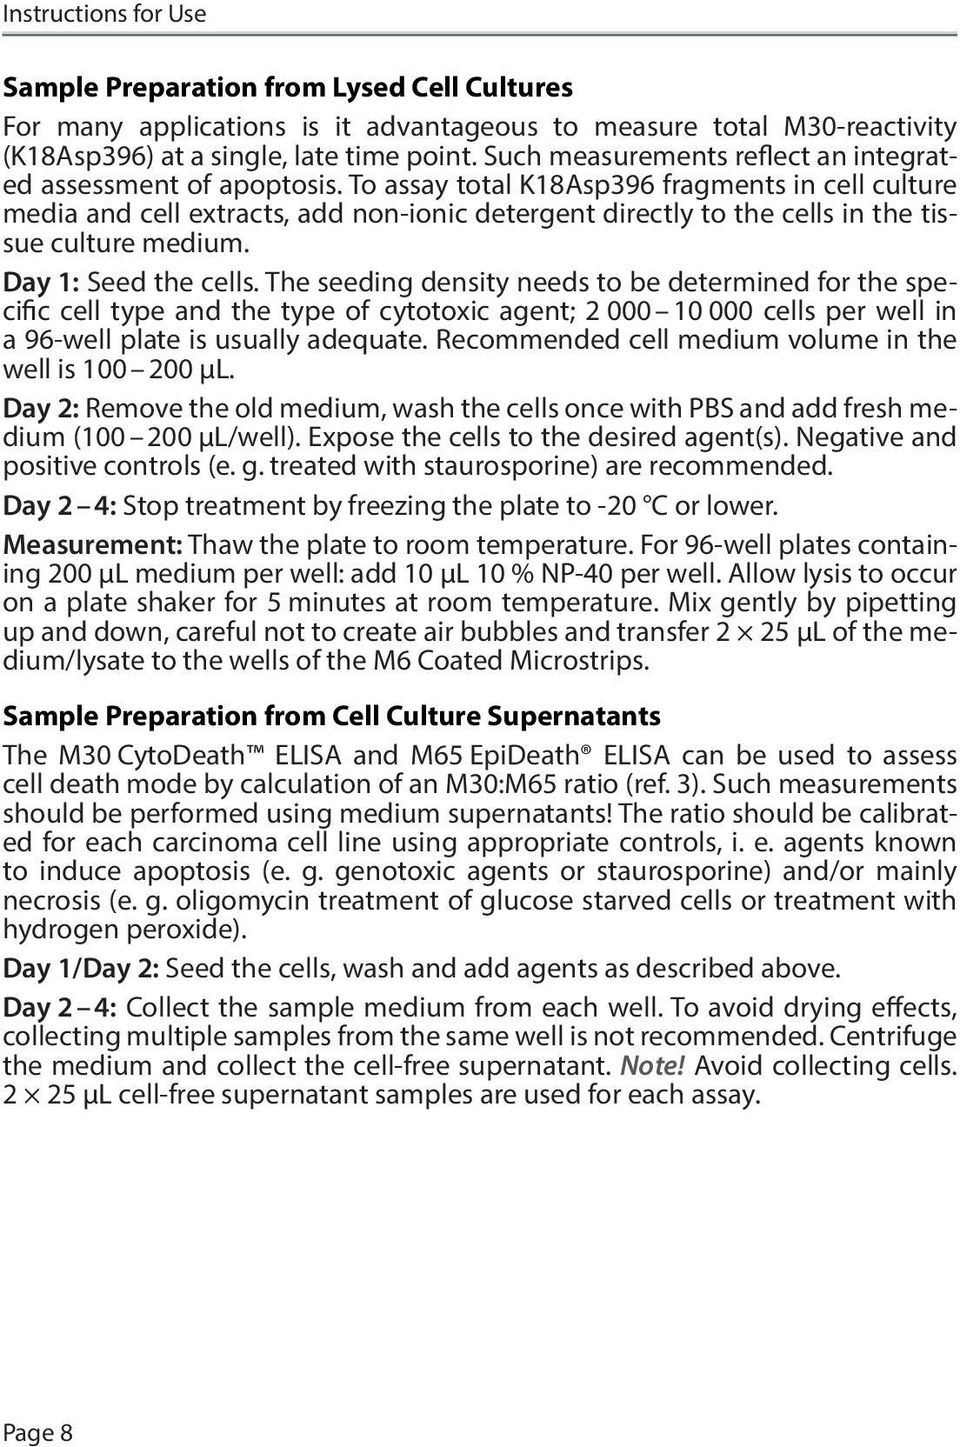 To assay total K18Asp396 fragments in cell culture media and cell extracts, add non-ionic detergent directly to the cells in the tissue culture medium. Day 1: Seed the cells.